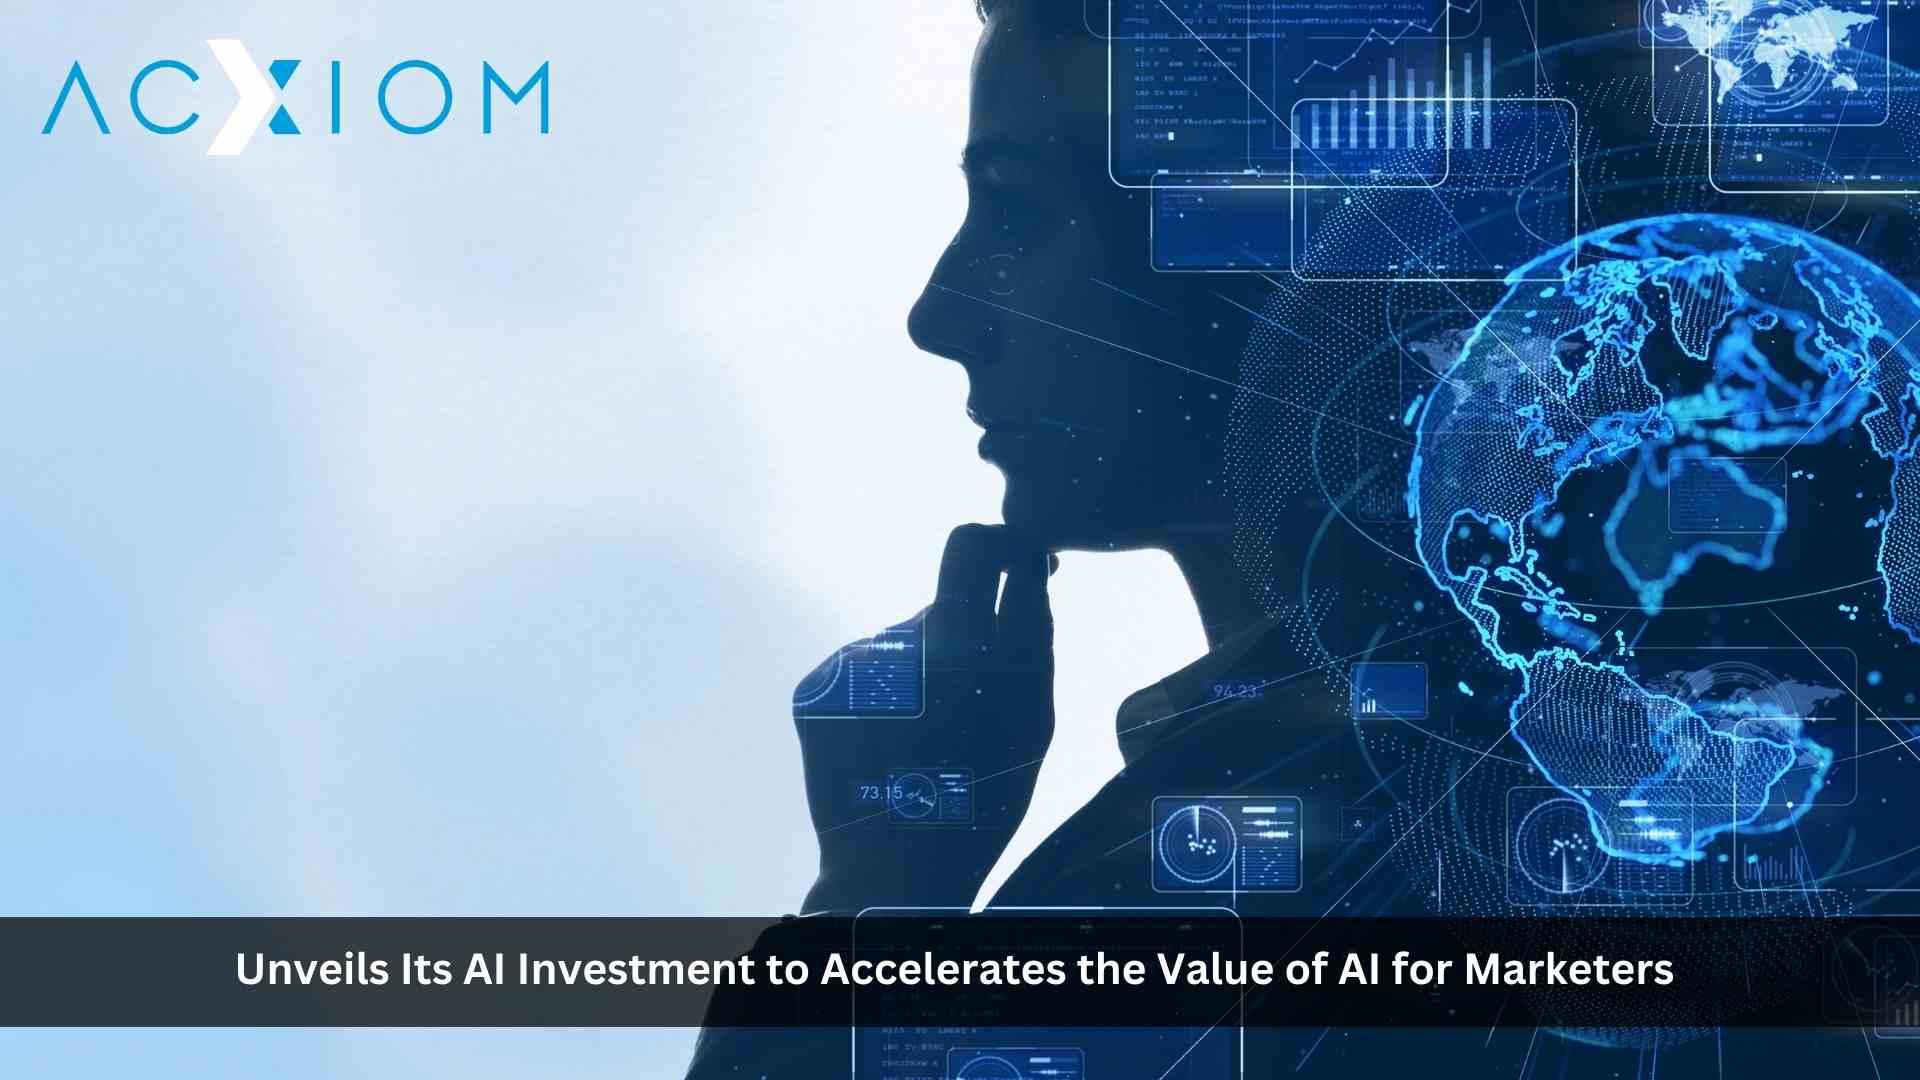 Acxiom's Expertise Accelerates the Value of AI for Marketers